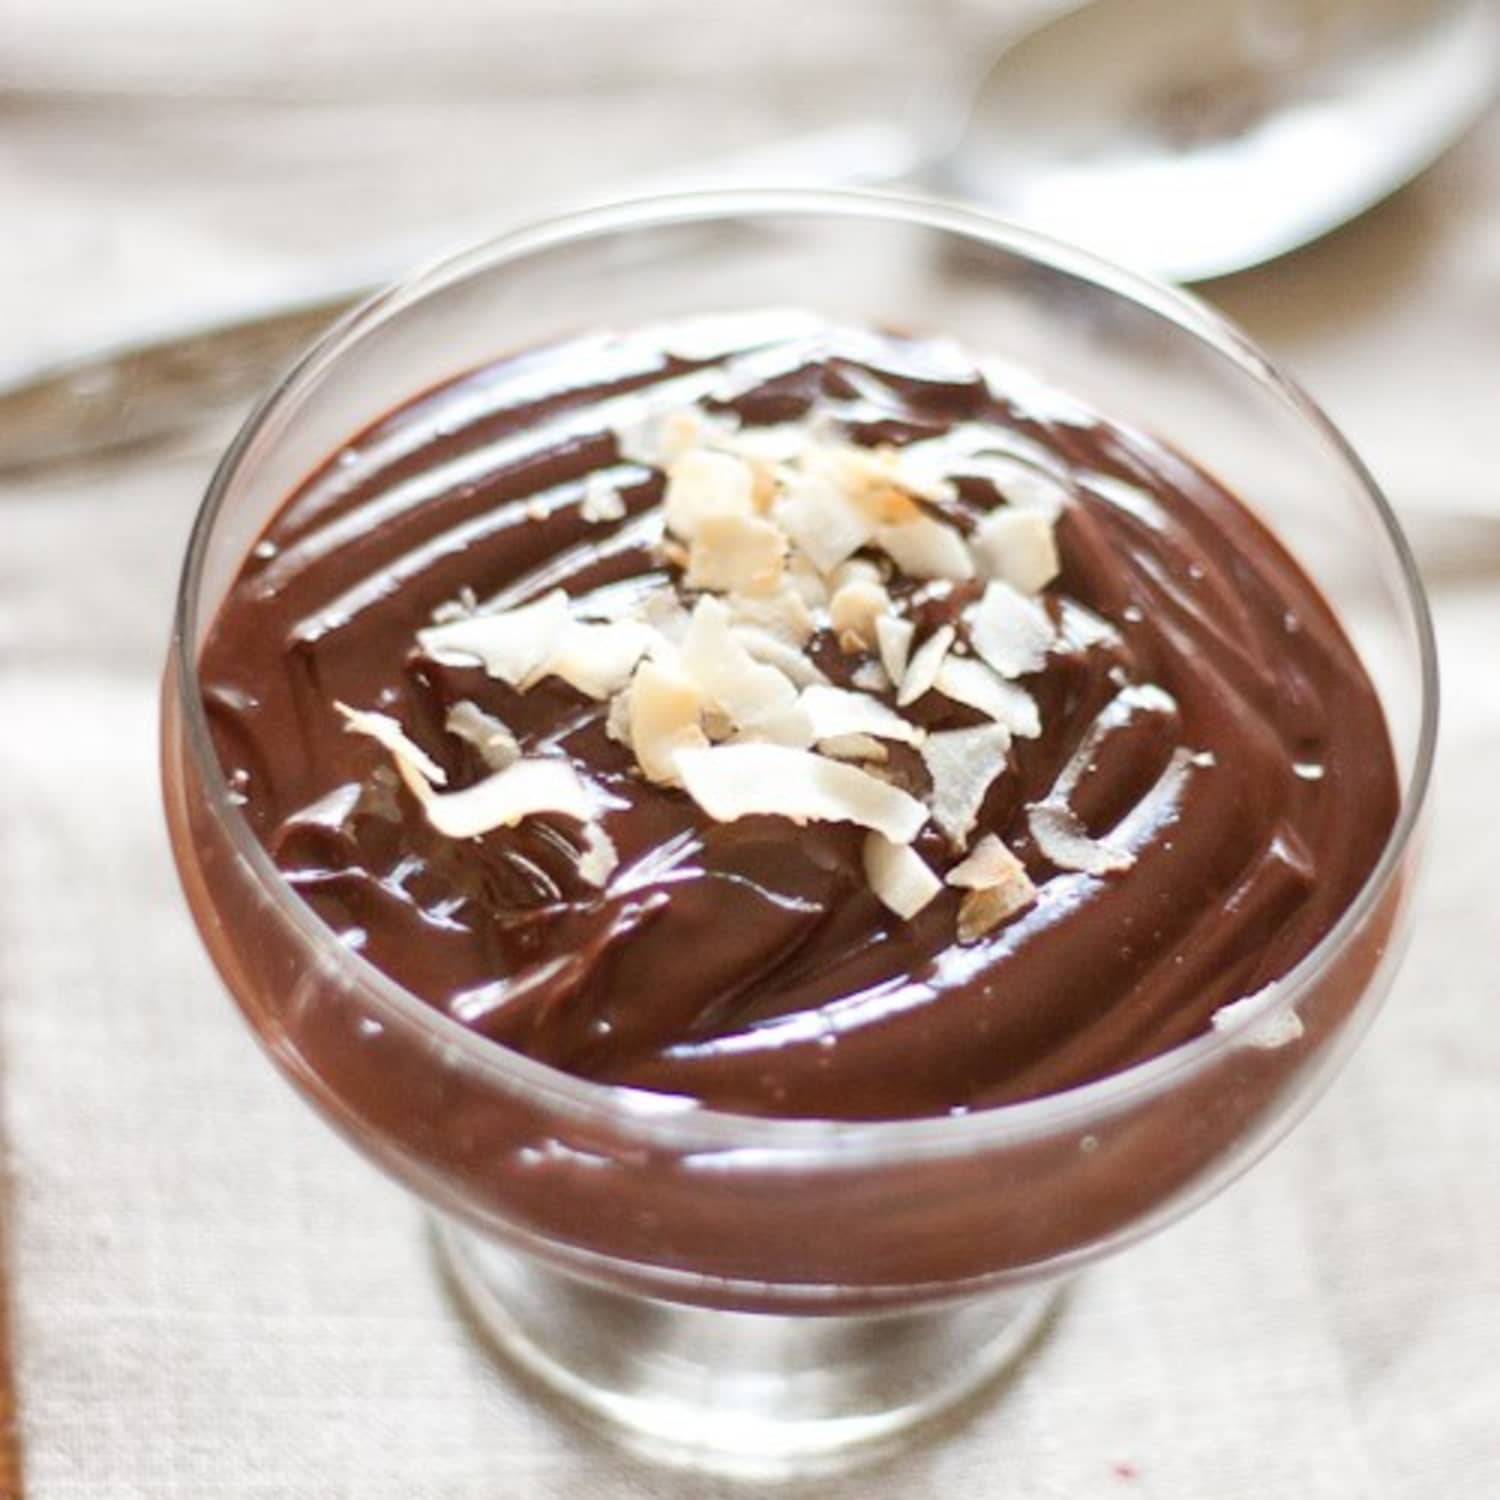 Dessert Coconut Chocolate Pudding with Coconut Flakes | Kitchn